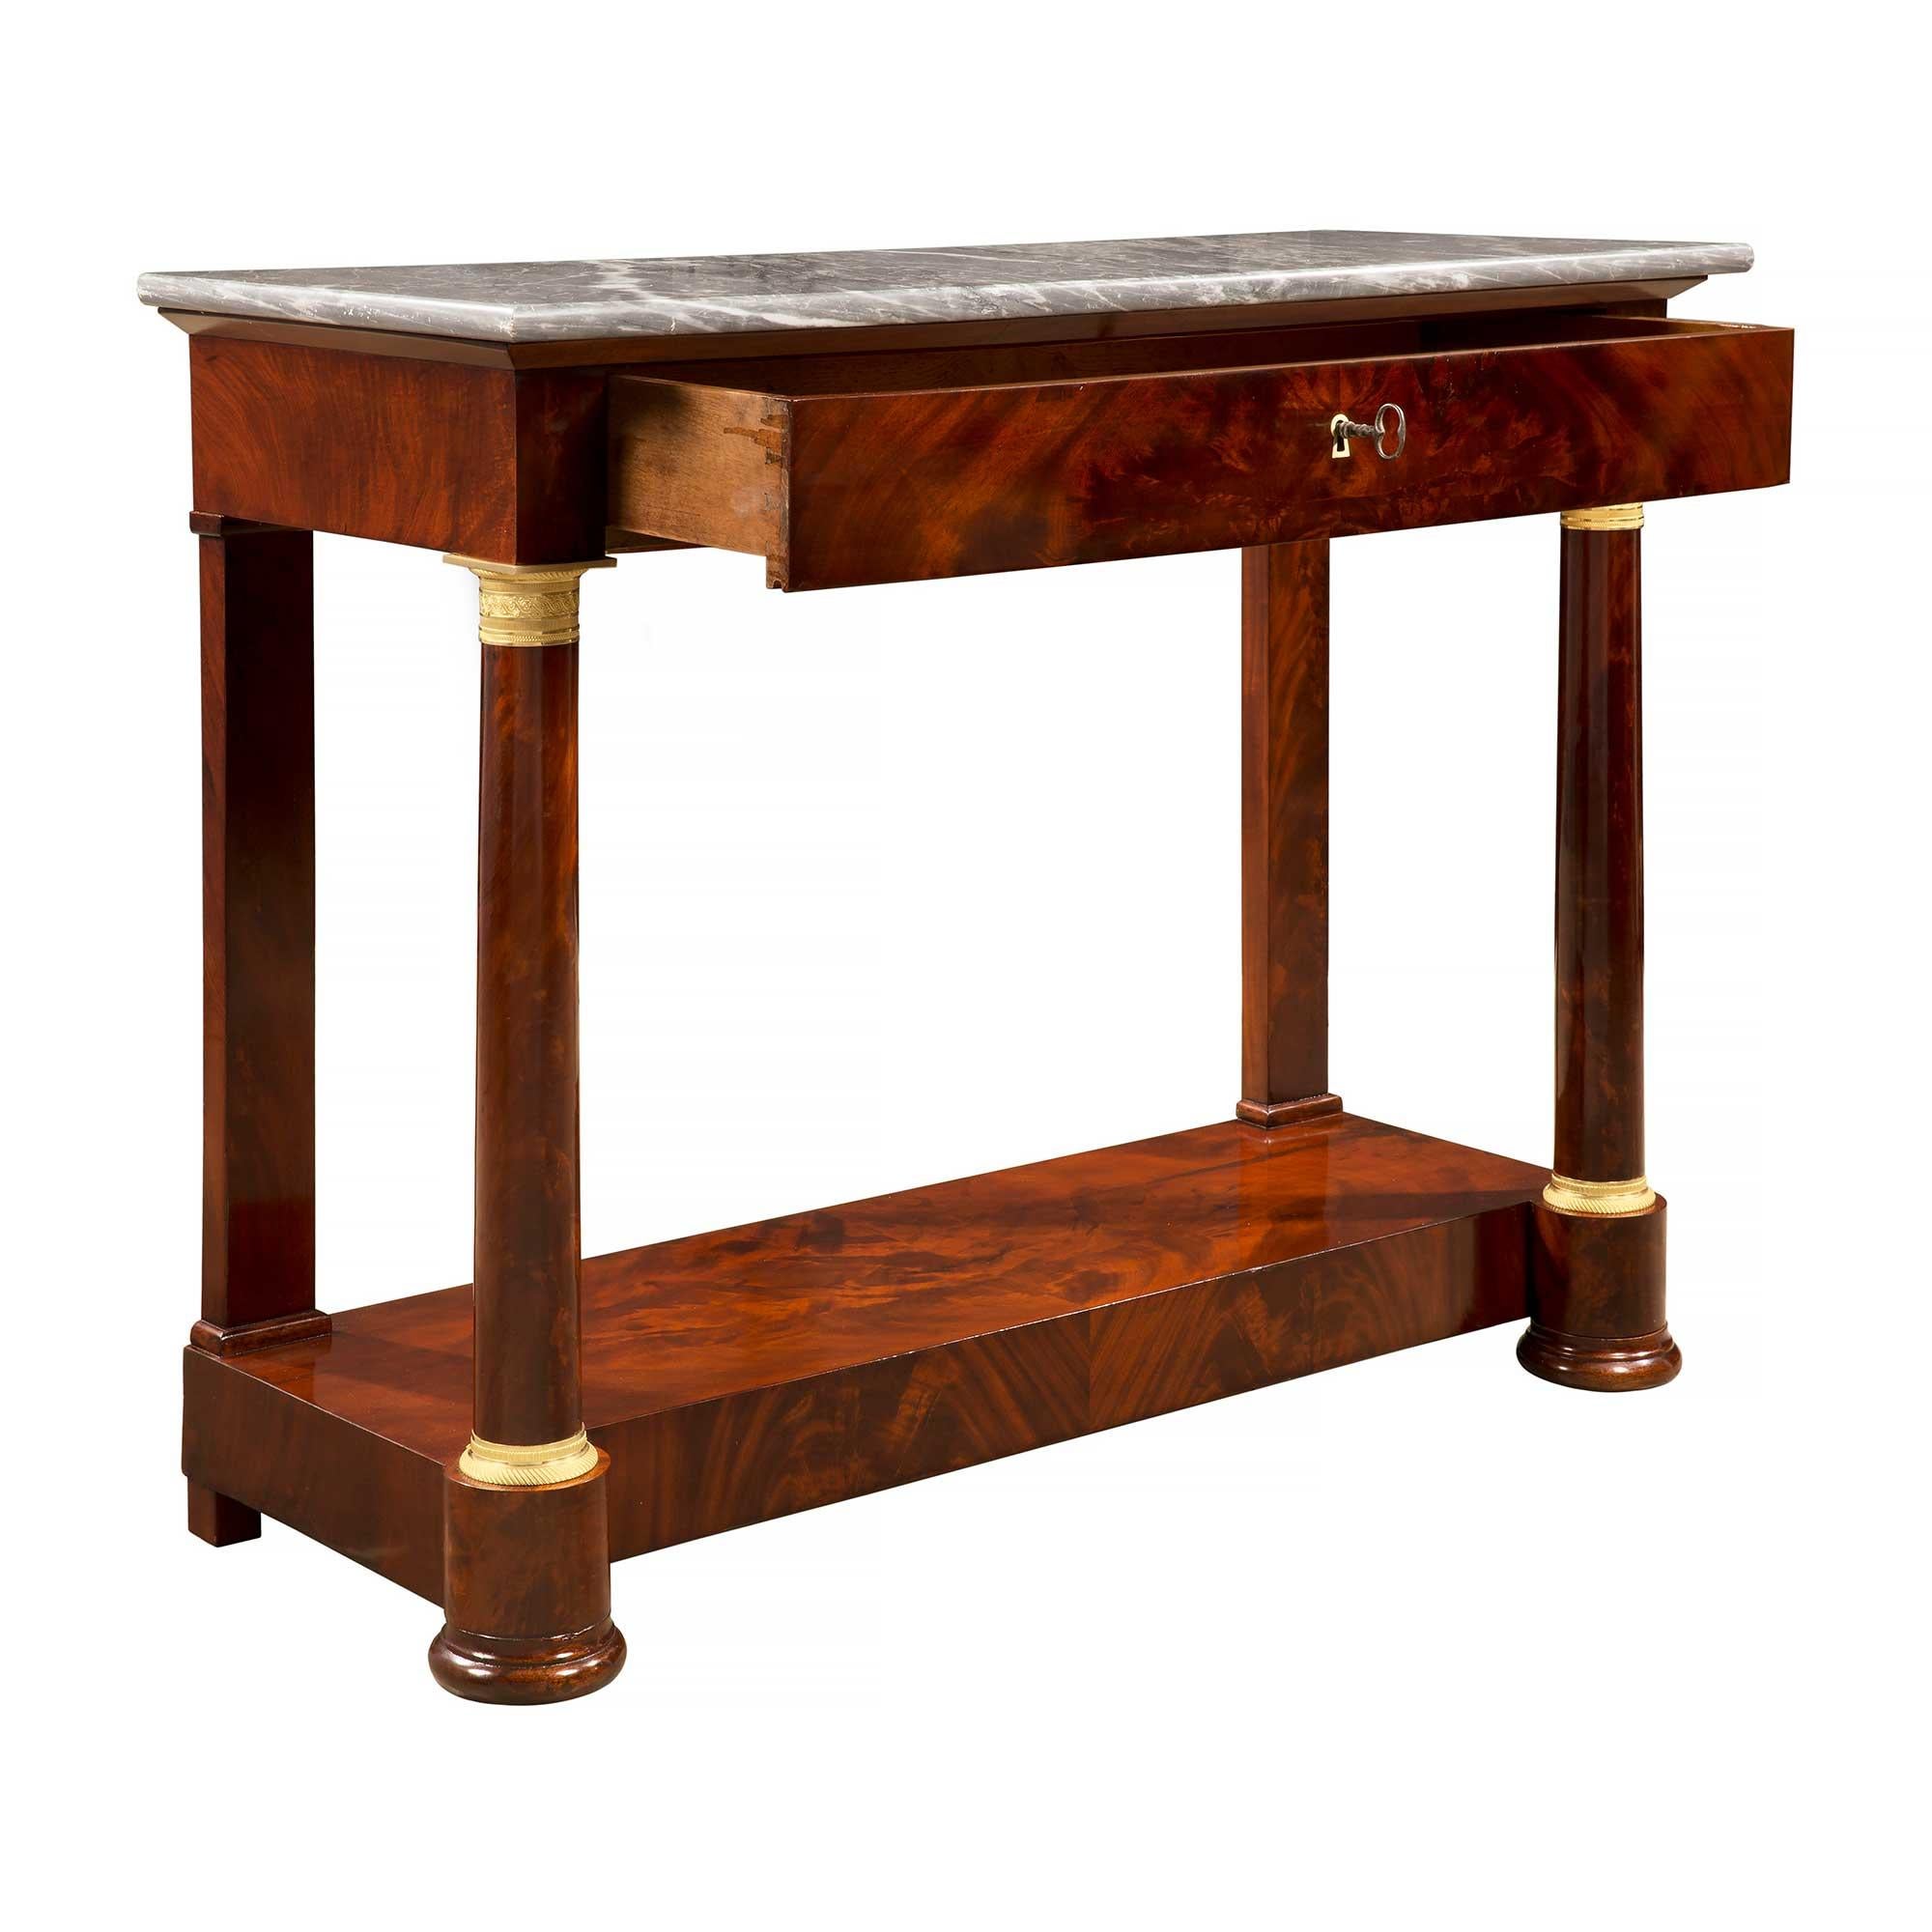 French 19th Century Empire Style Flamed Mahogany, Ormolu and Marble Console For Sale 1